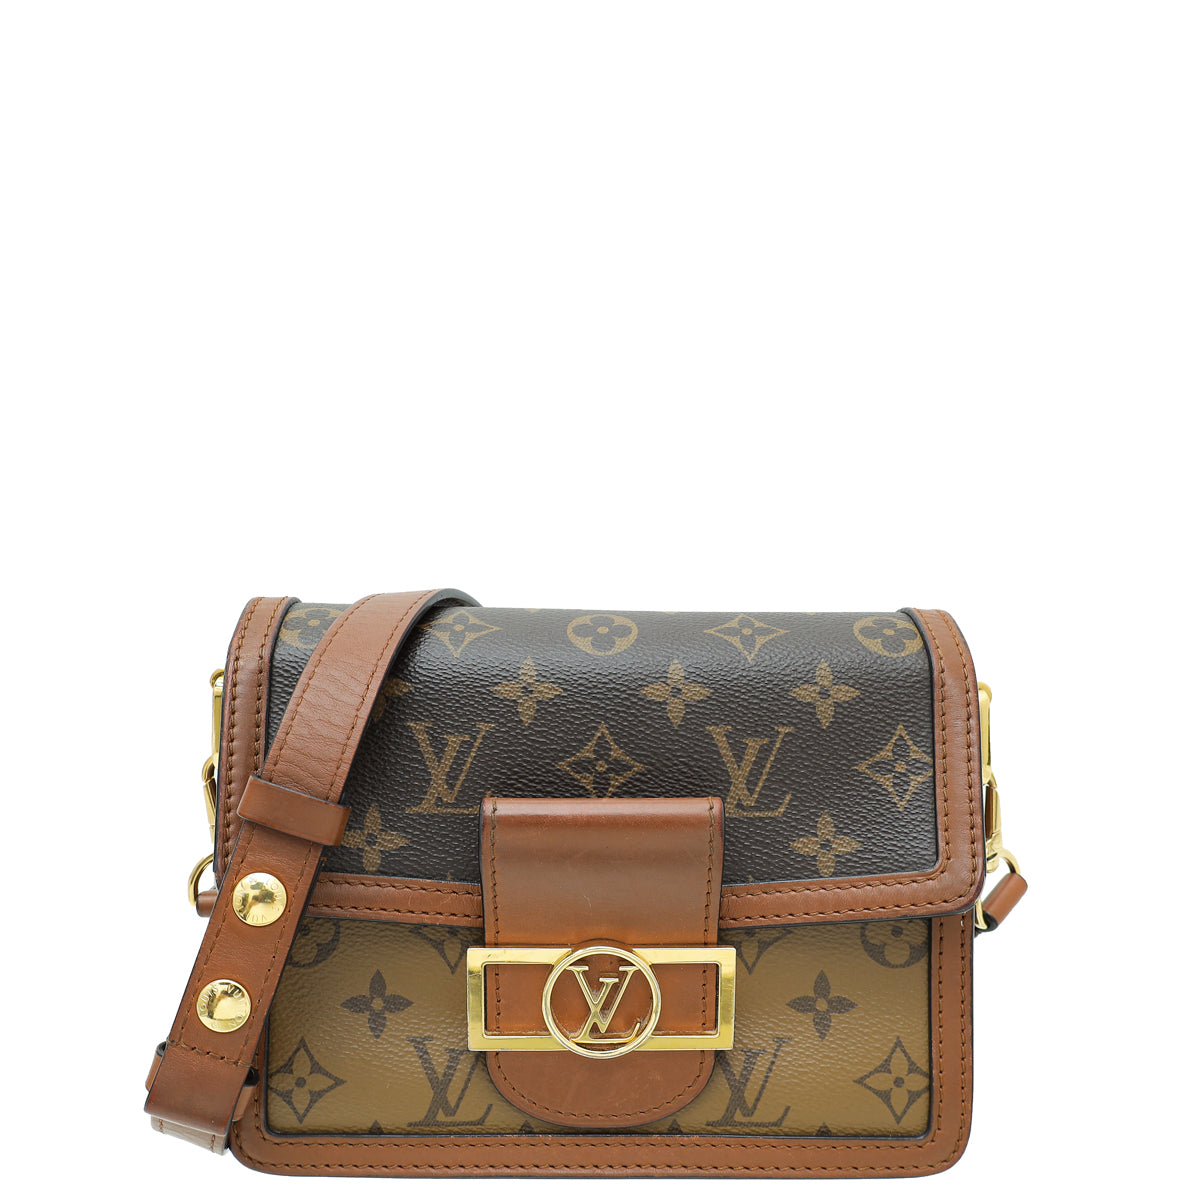 Louis Vuitton Dauphine Smooth Leather Shoulder Bag